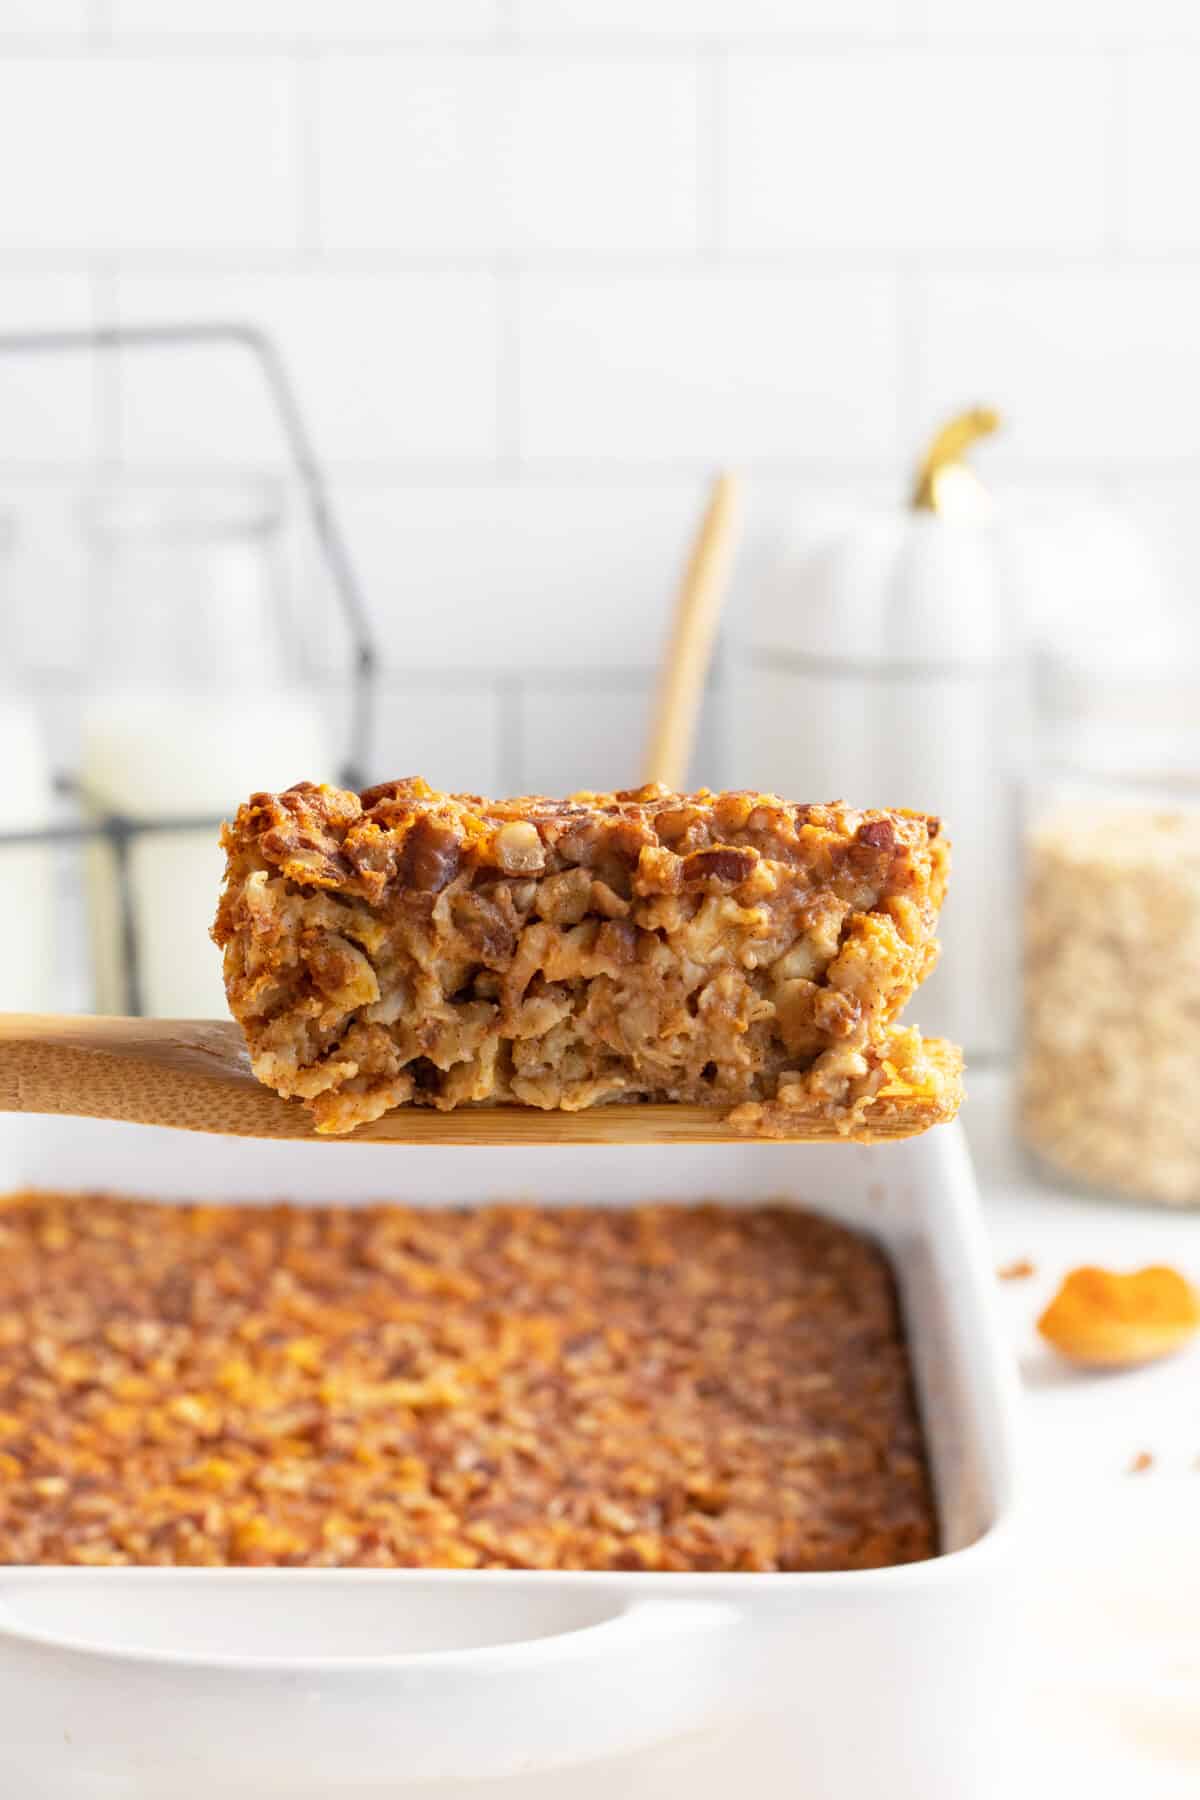 pumpkin baked oatmeal slice lifted out of the pan